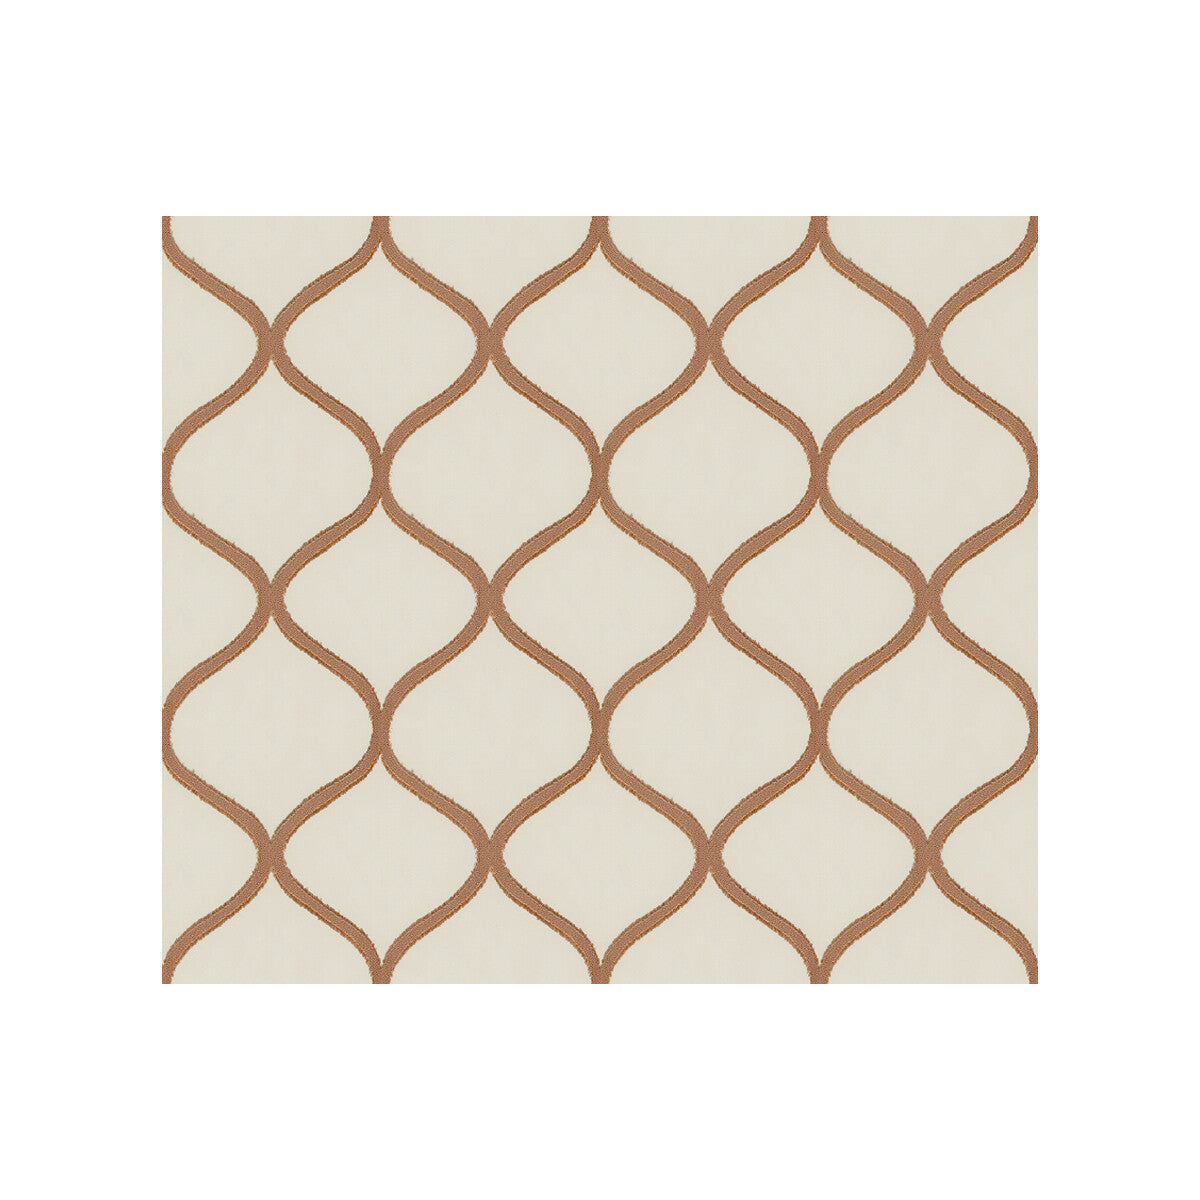 Liona fabric in copper color - pattern 3895.640.0 - by Kravet Contract